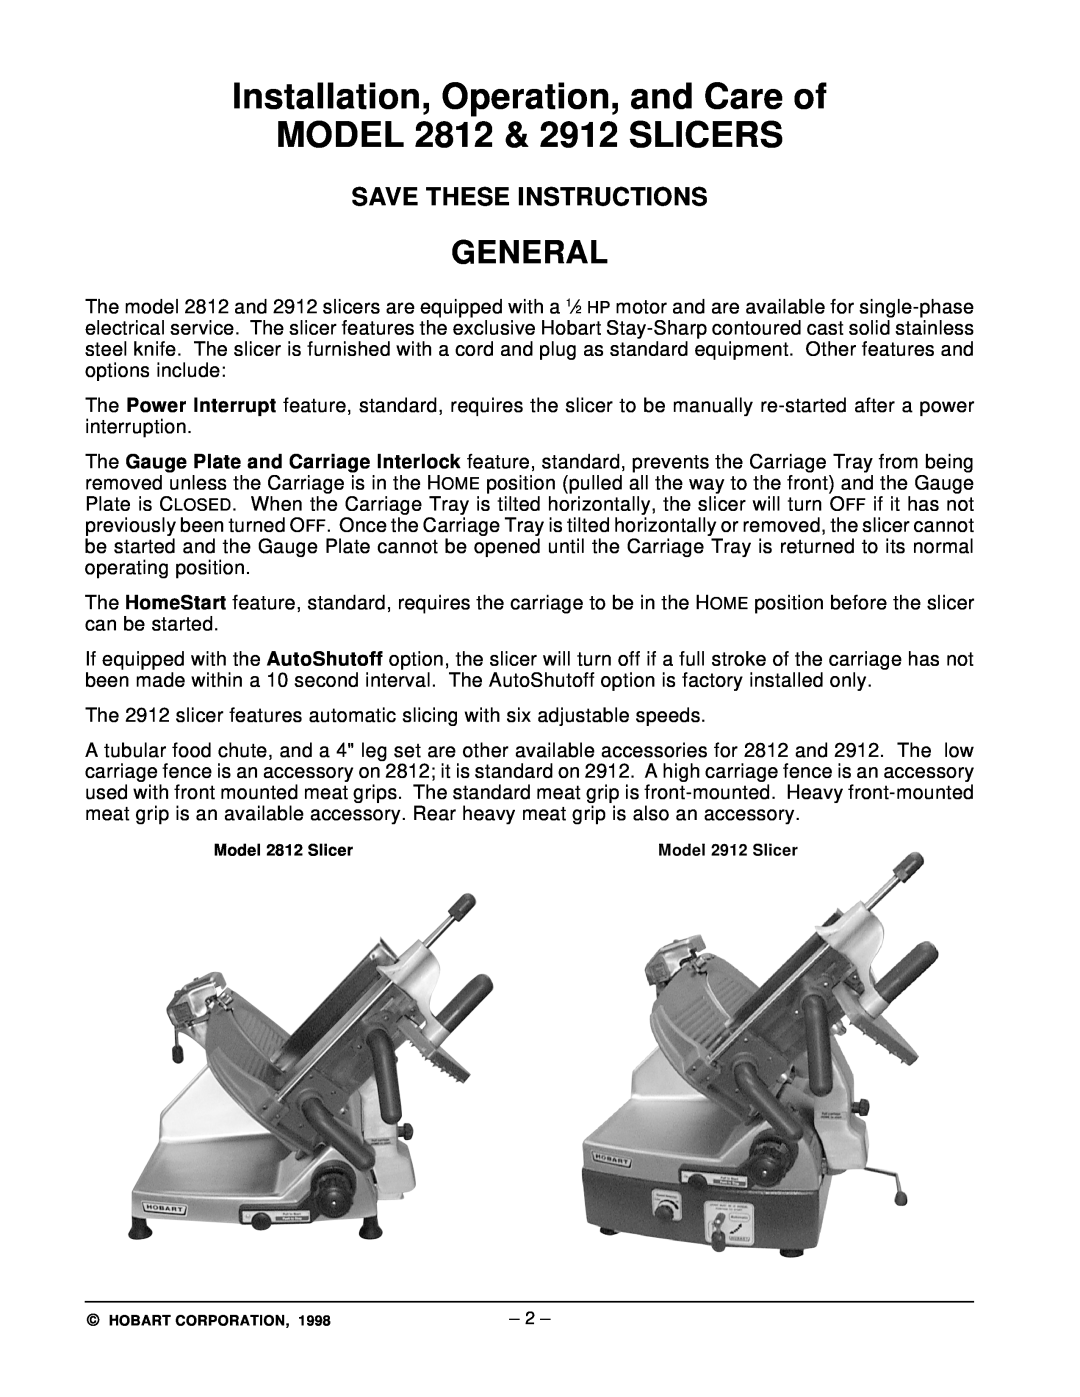 Hobart manual General, Installation, Operation, and Care of MODEL 2812 & 2912 SLICERS, Save These Instructions 